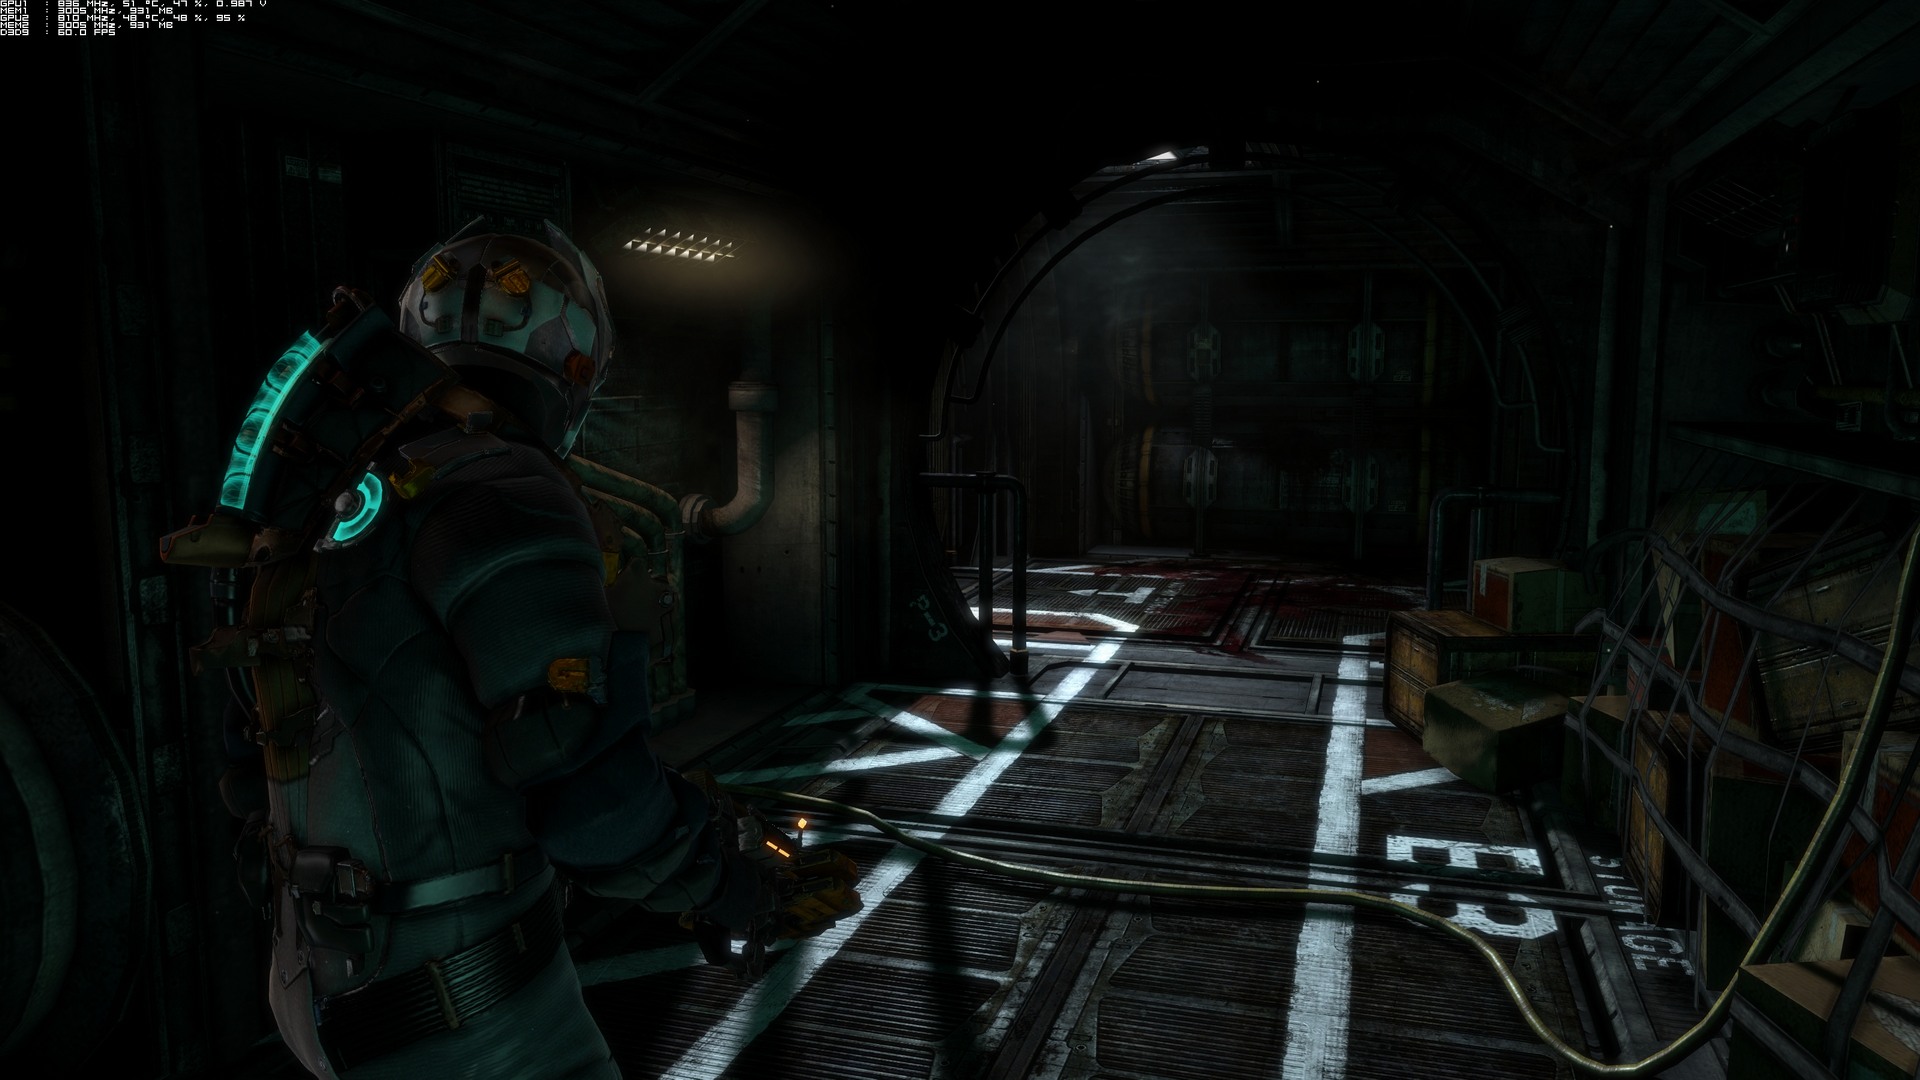 Dead Space 3 System Requirements Are Suited For A PC From 2004